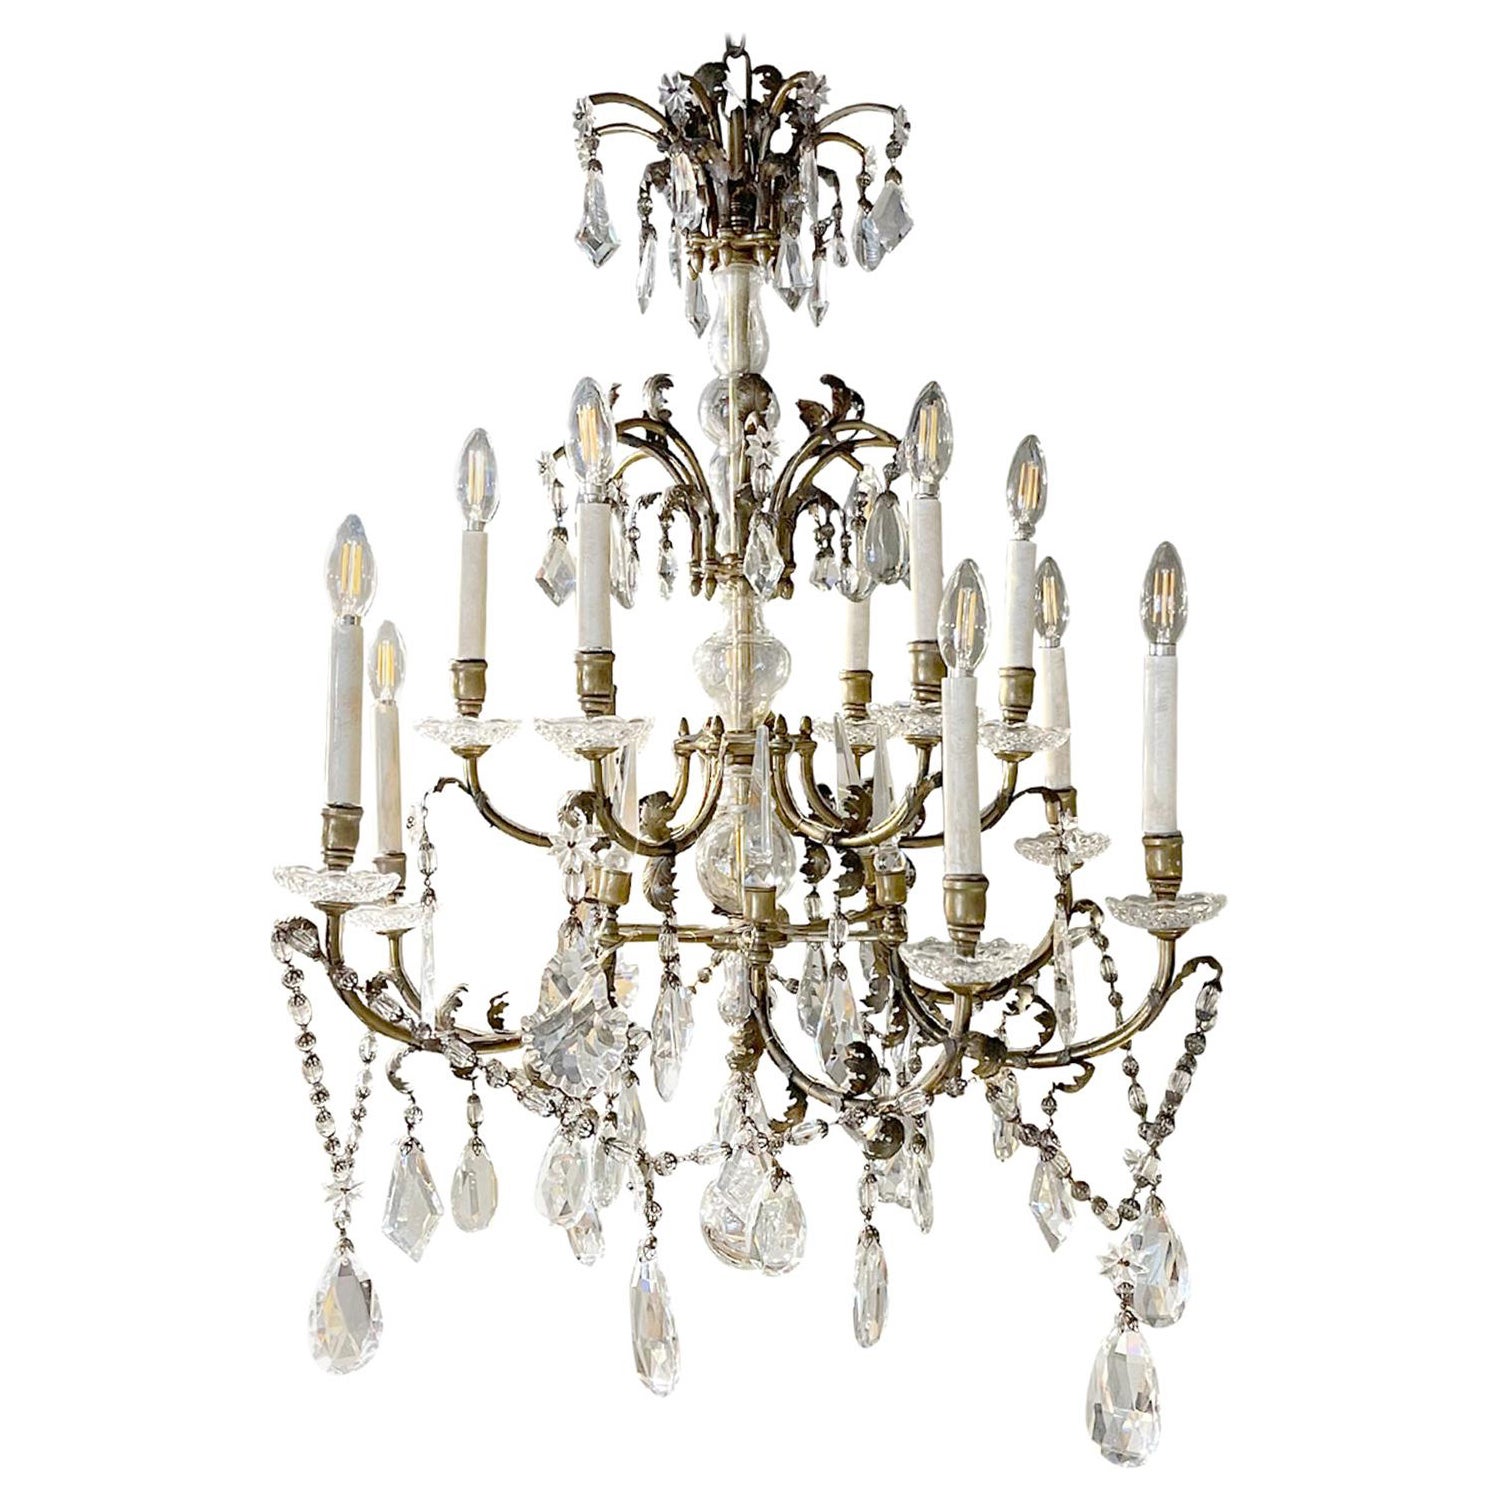 20th Century French Four Tiered Bronze Chandelier, Clear Crystal Glass Pendant